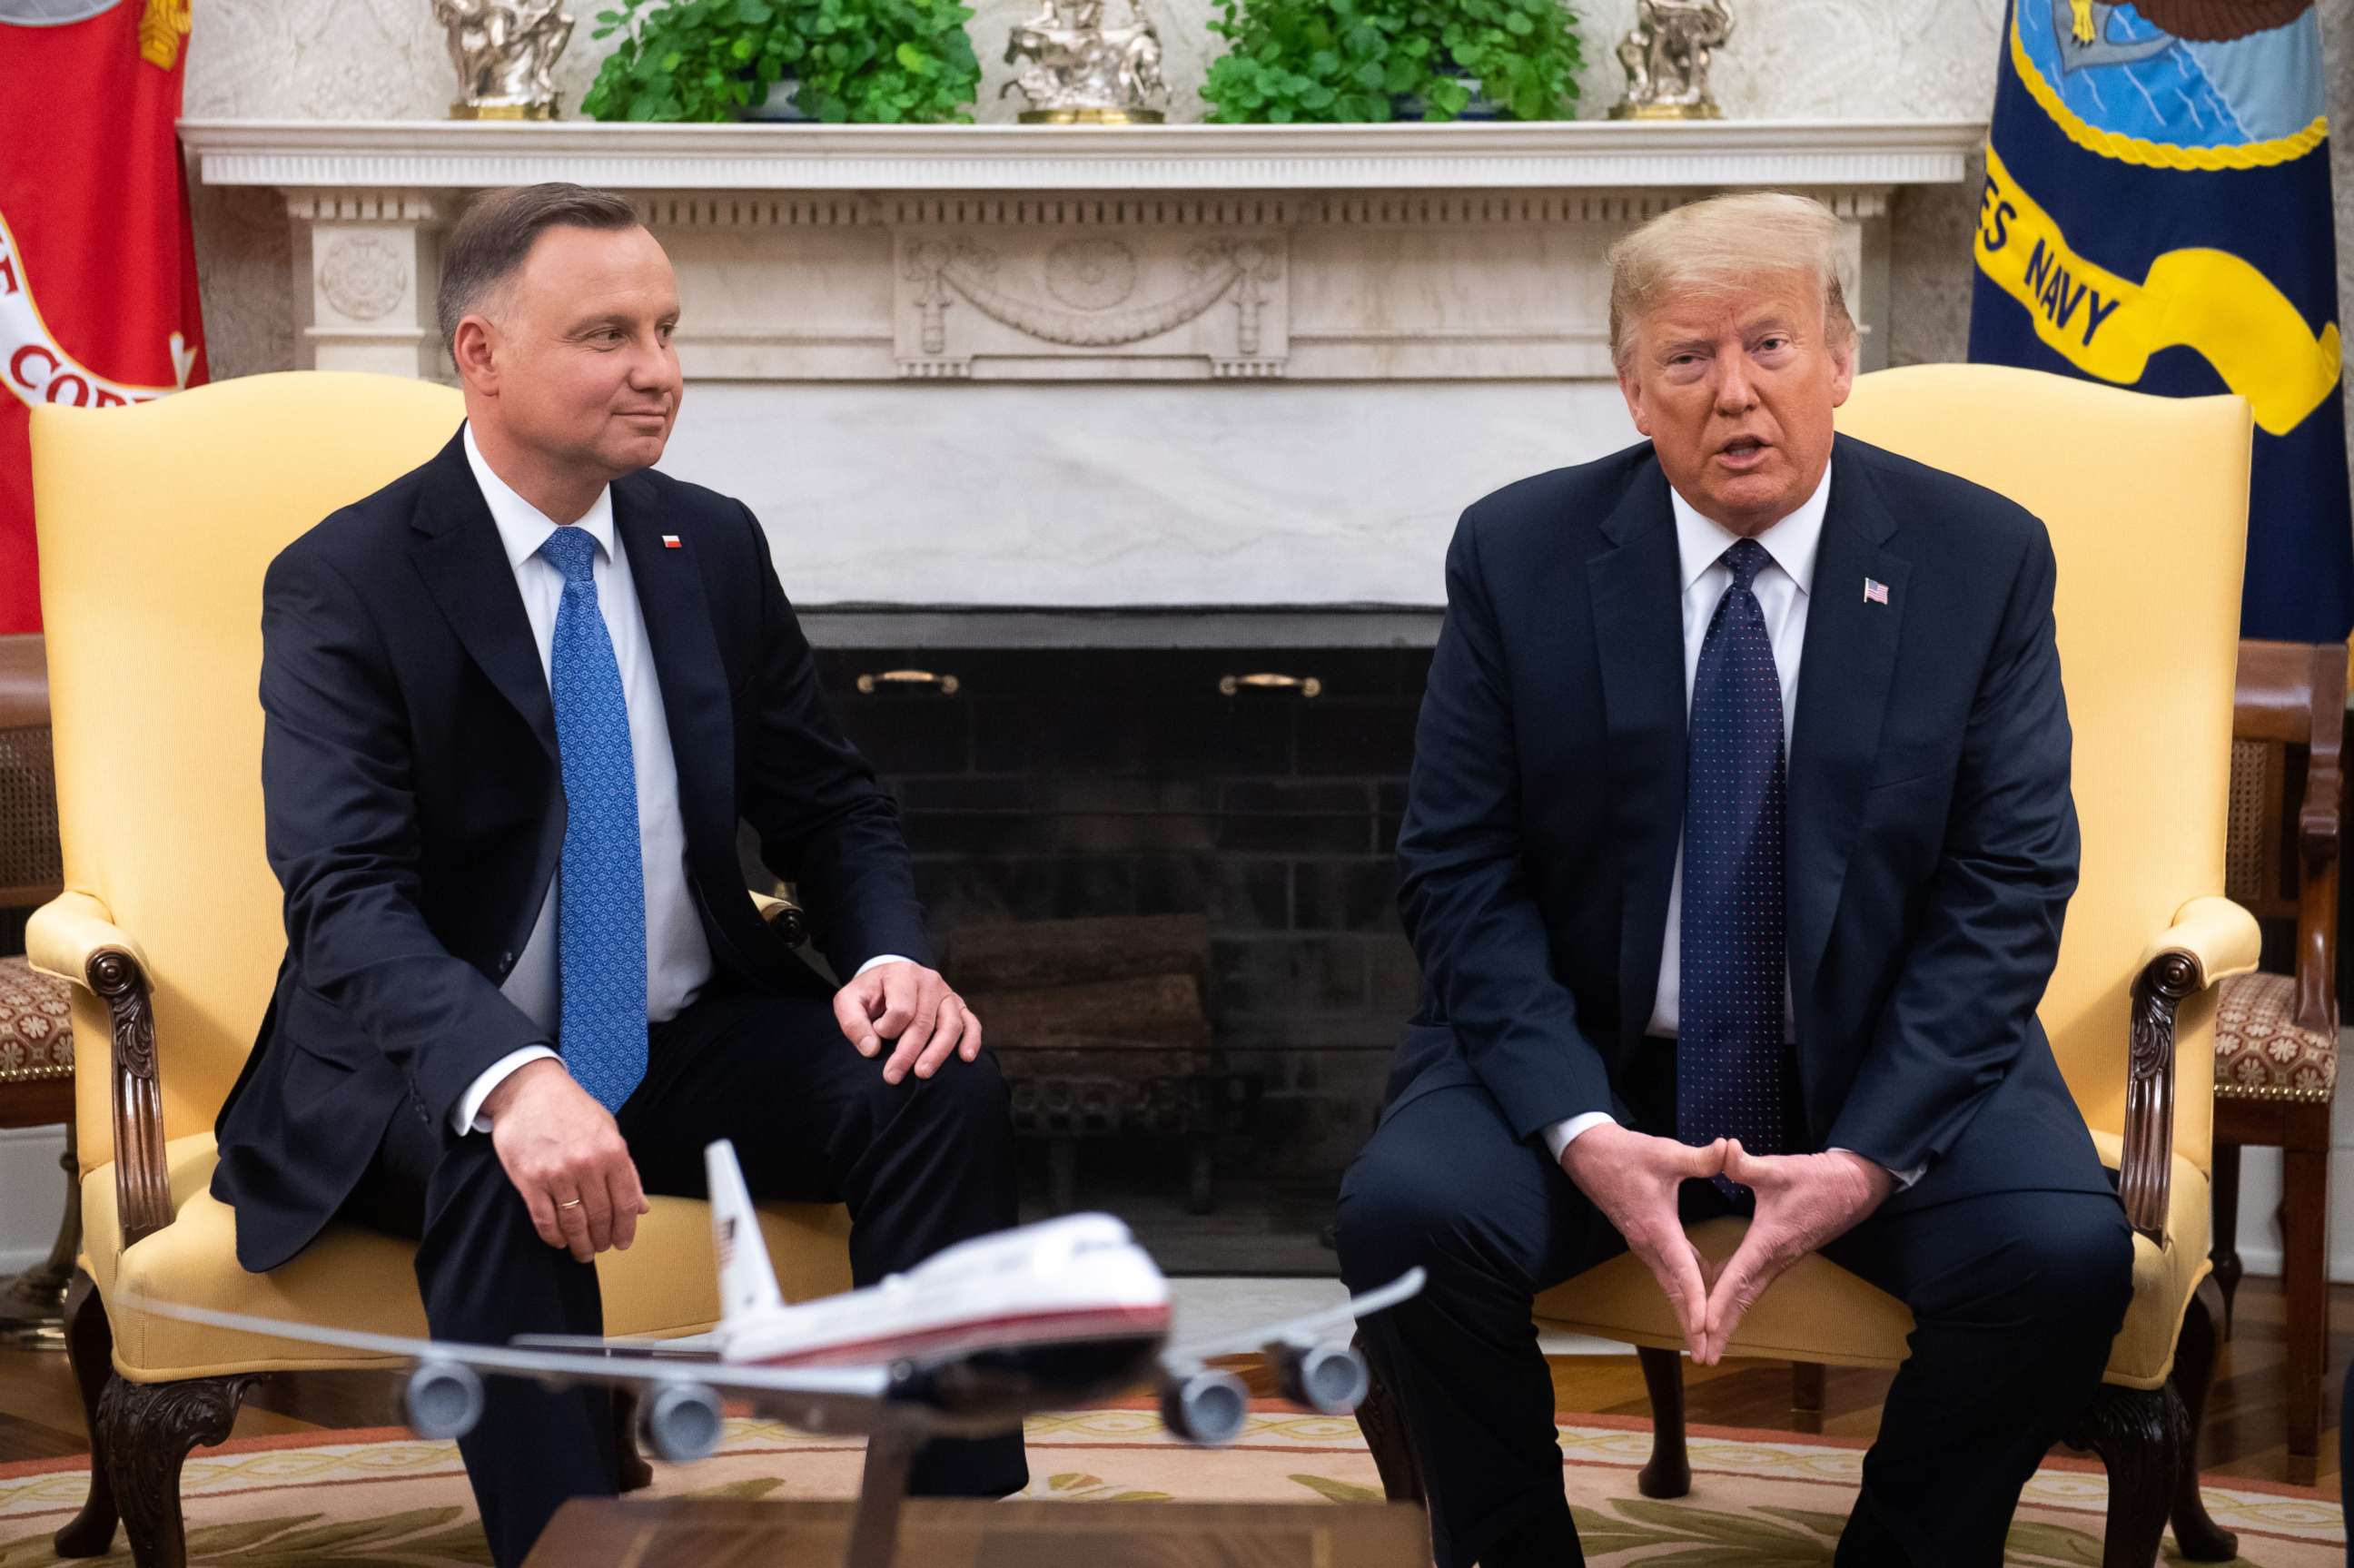 PHOTO: President Donald Trump and Polish President Andrzej Duda hold a meeting in the Oval Office of the White House in Washington, June 24, 2020.